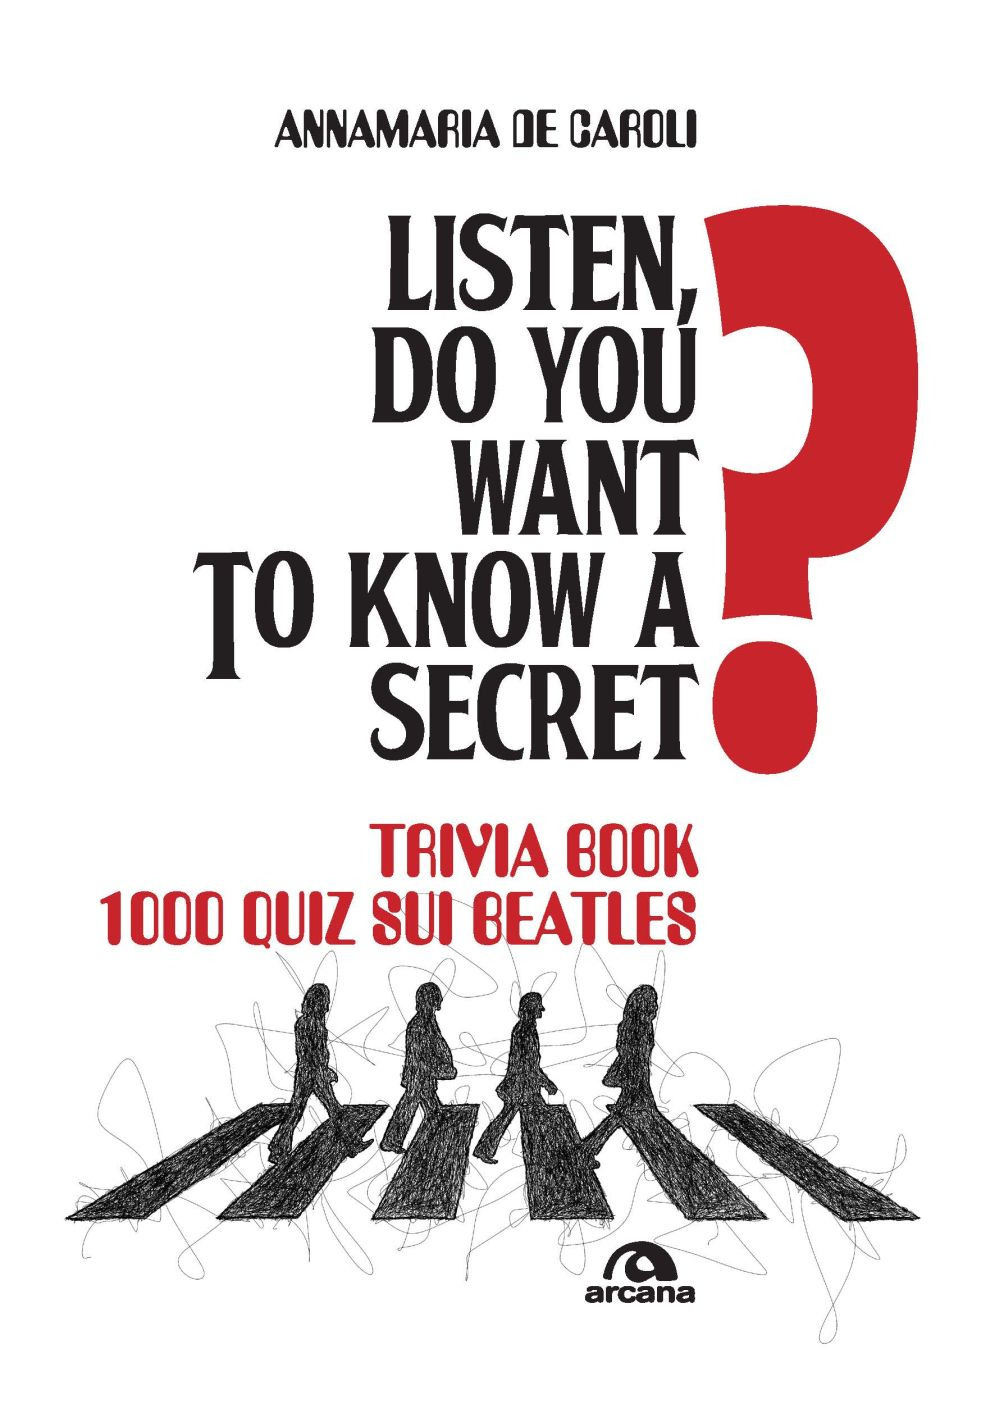 LISTEN, DO YOU WANT TO KNOW A SECRET - 9788892770898